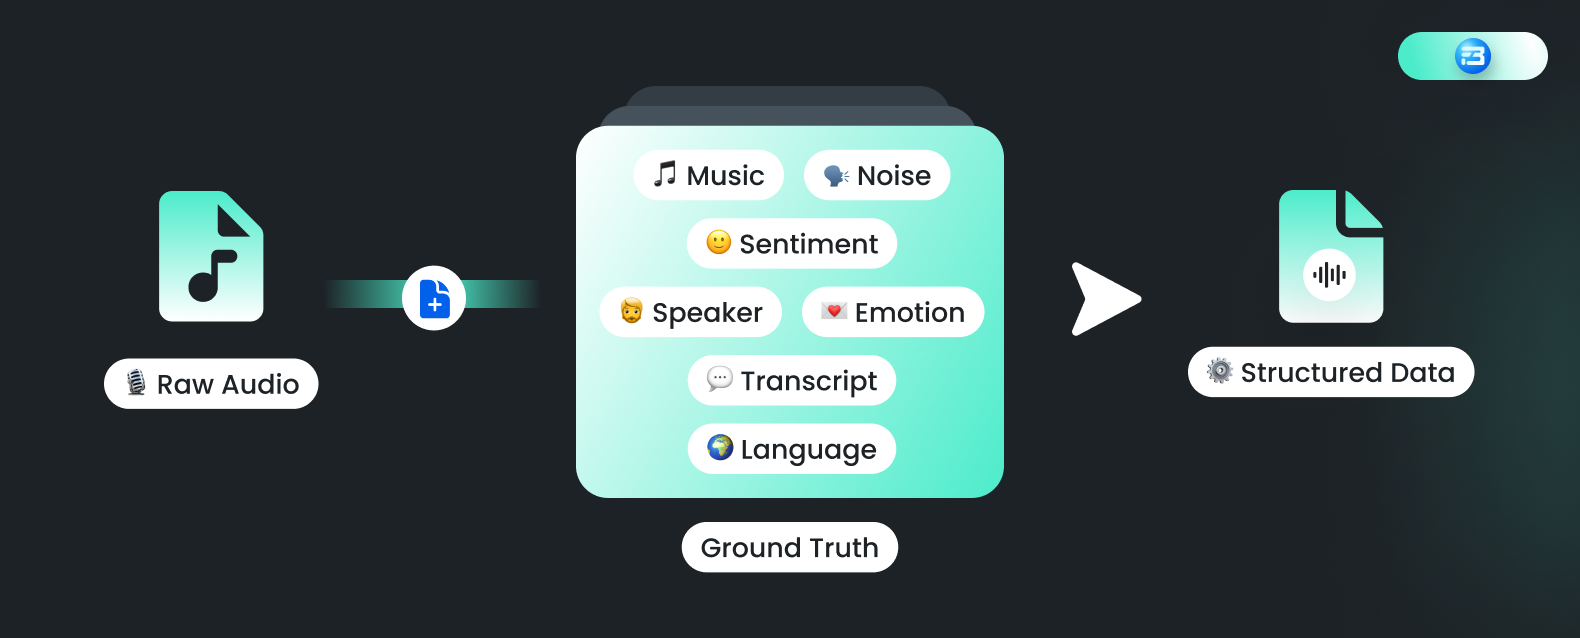 Get the lowdown on audio annotation, including transcription and speech-to-text. Discover what you need to know in a nutshell.